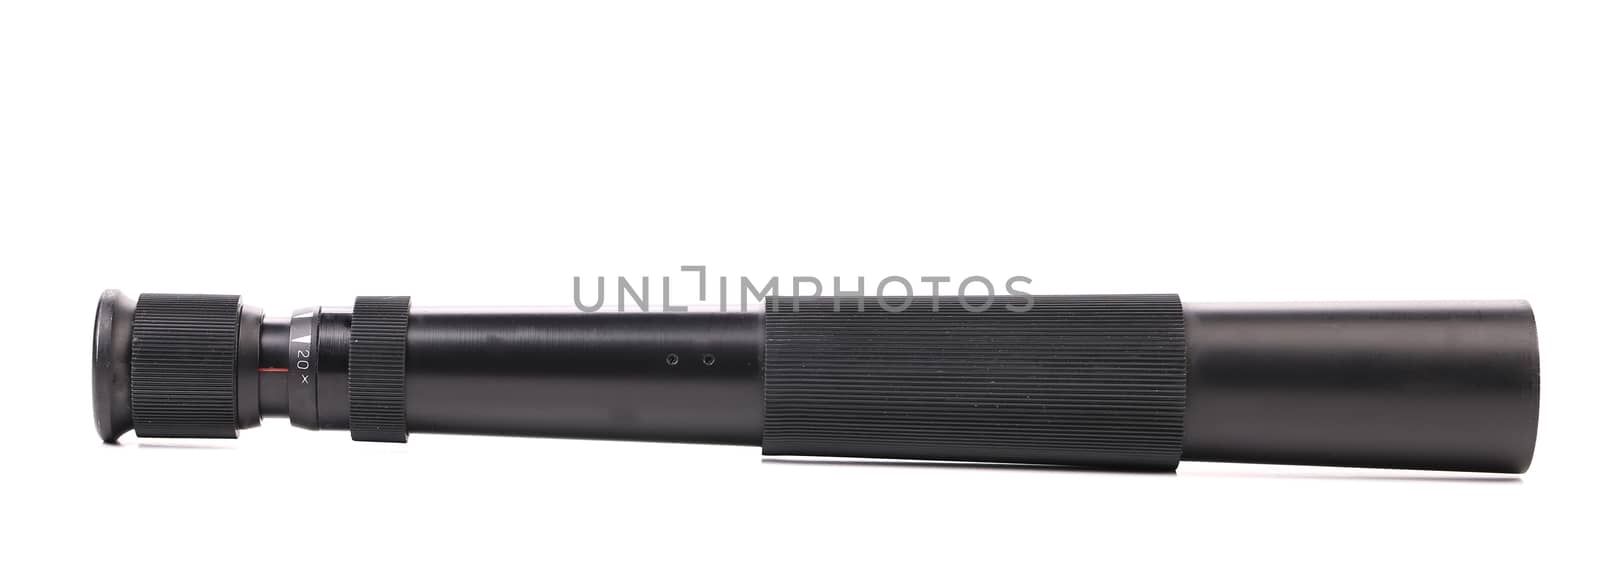 Black spyglass lying.Isolated on a white background